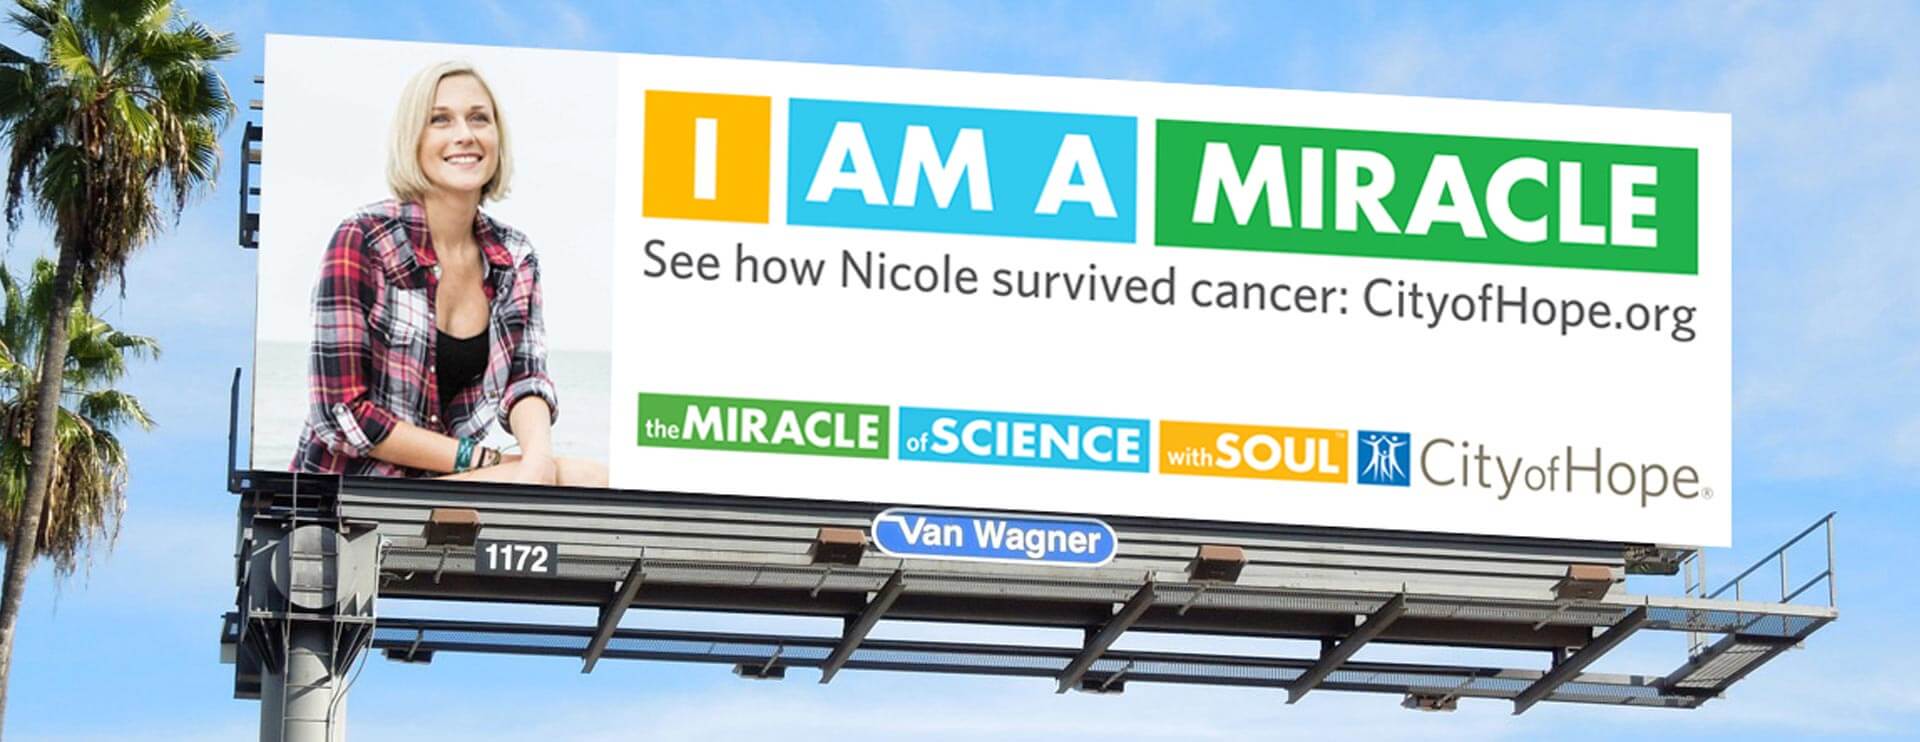 City of Hope. The miracle of science with soul. Billboard